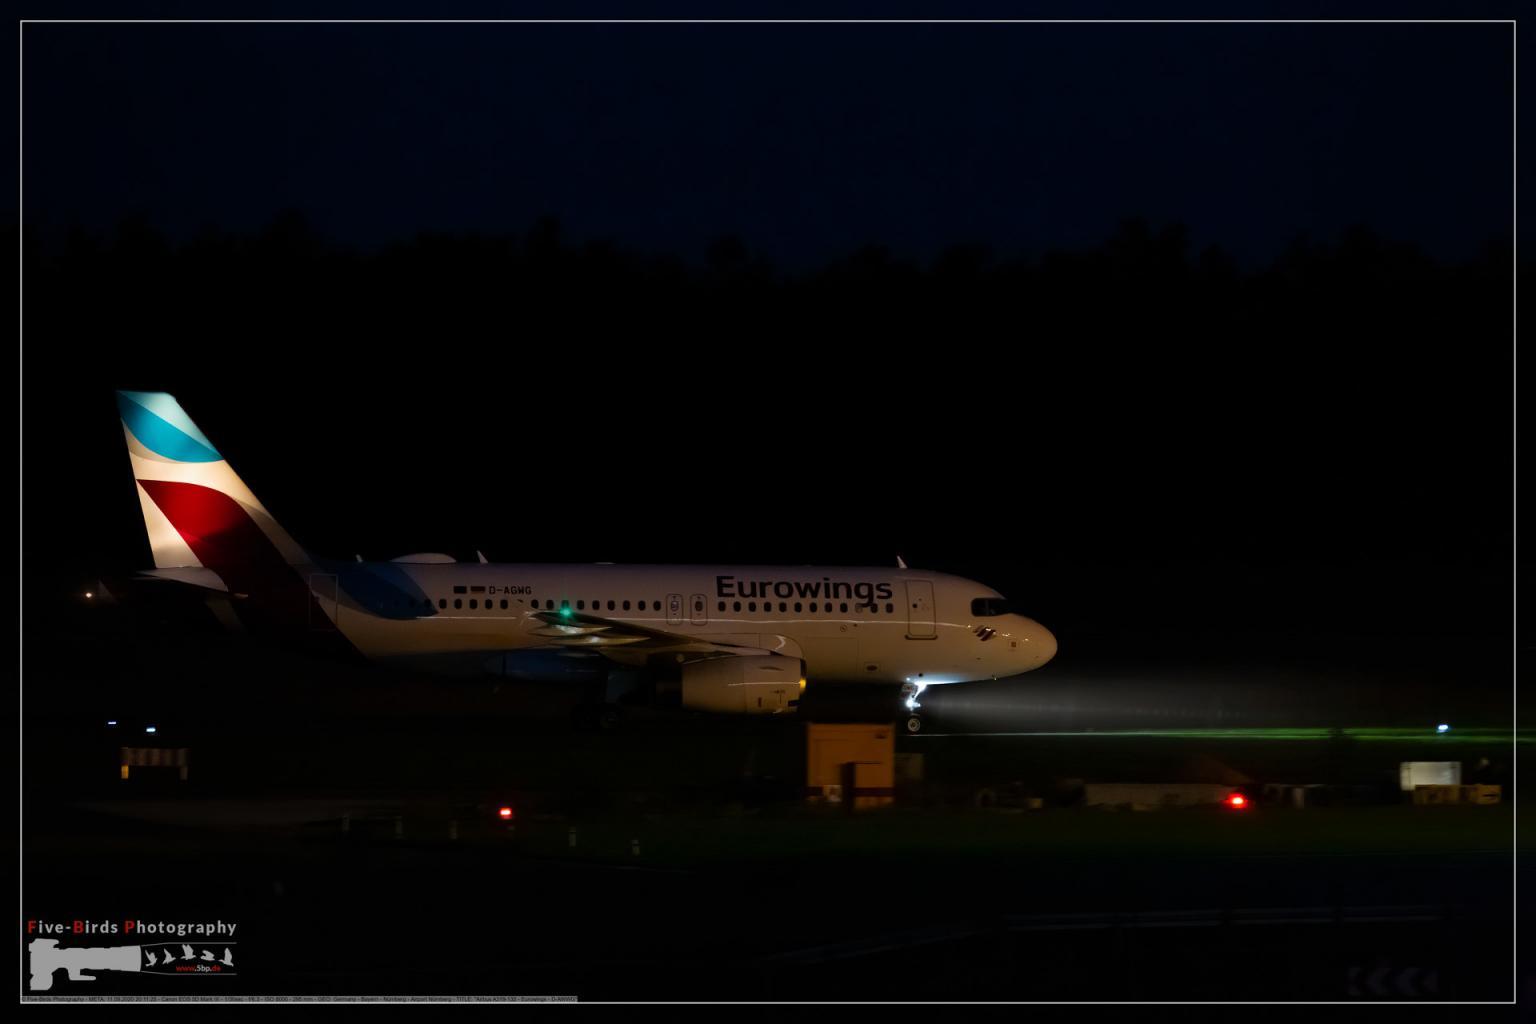 Airbus A319-132 - Eurowings - D-AWWG